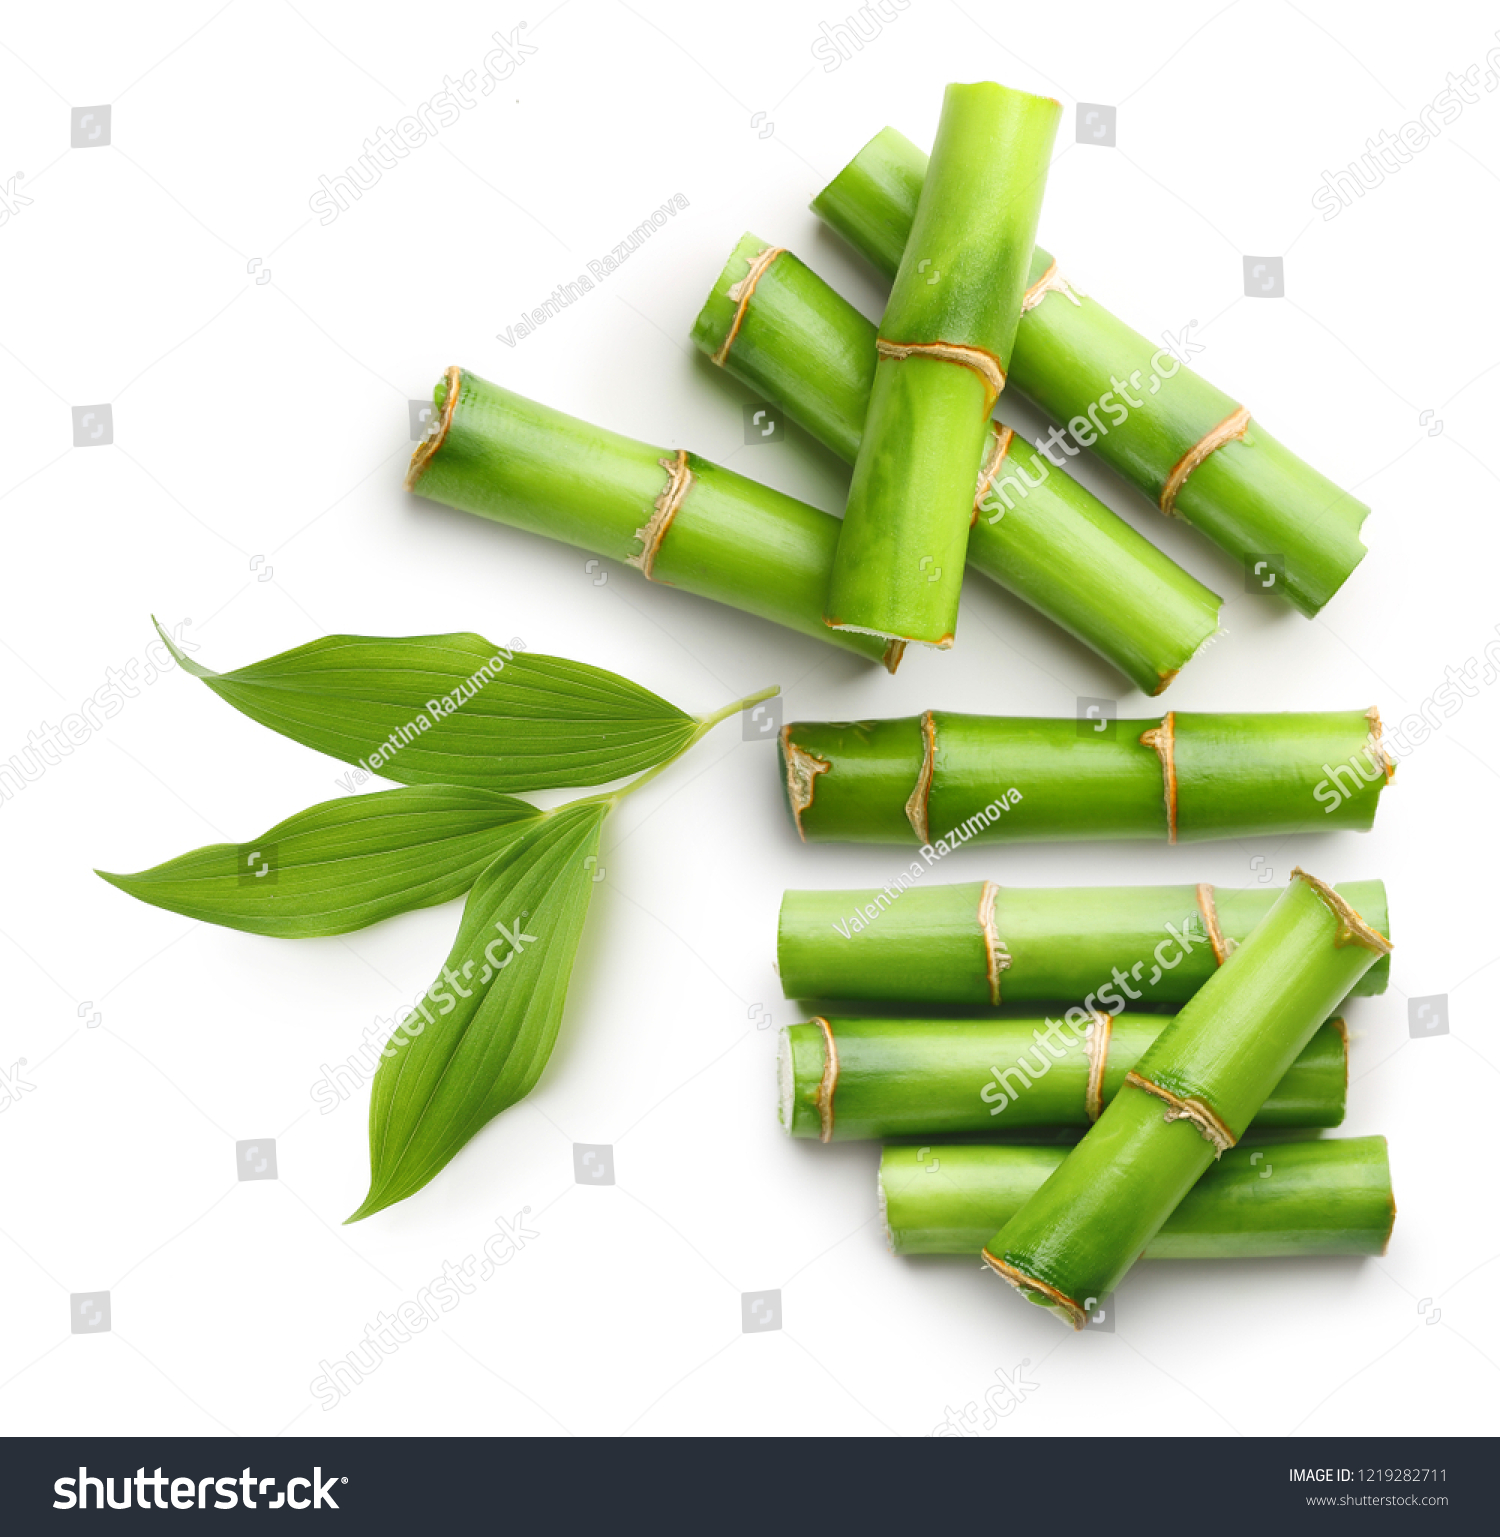 Branches of bamboo isolated on white background #1219282711